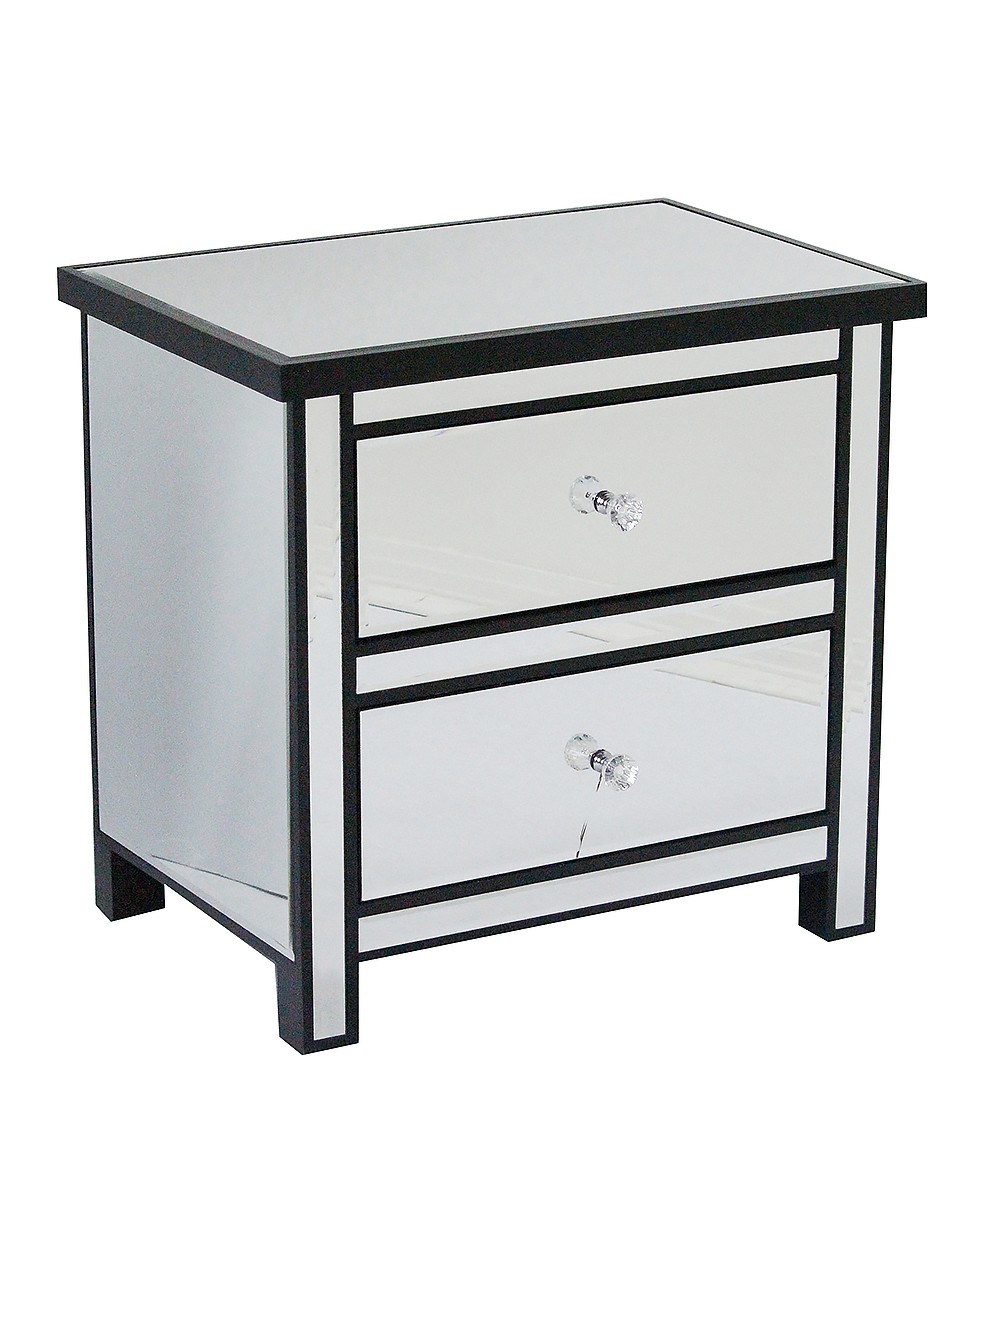 23" X 15.75" X 22" Black MDF Wood Mirrored Glass Accent Cabinet with Mirrored Drawers